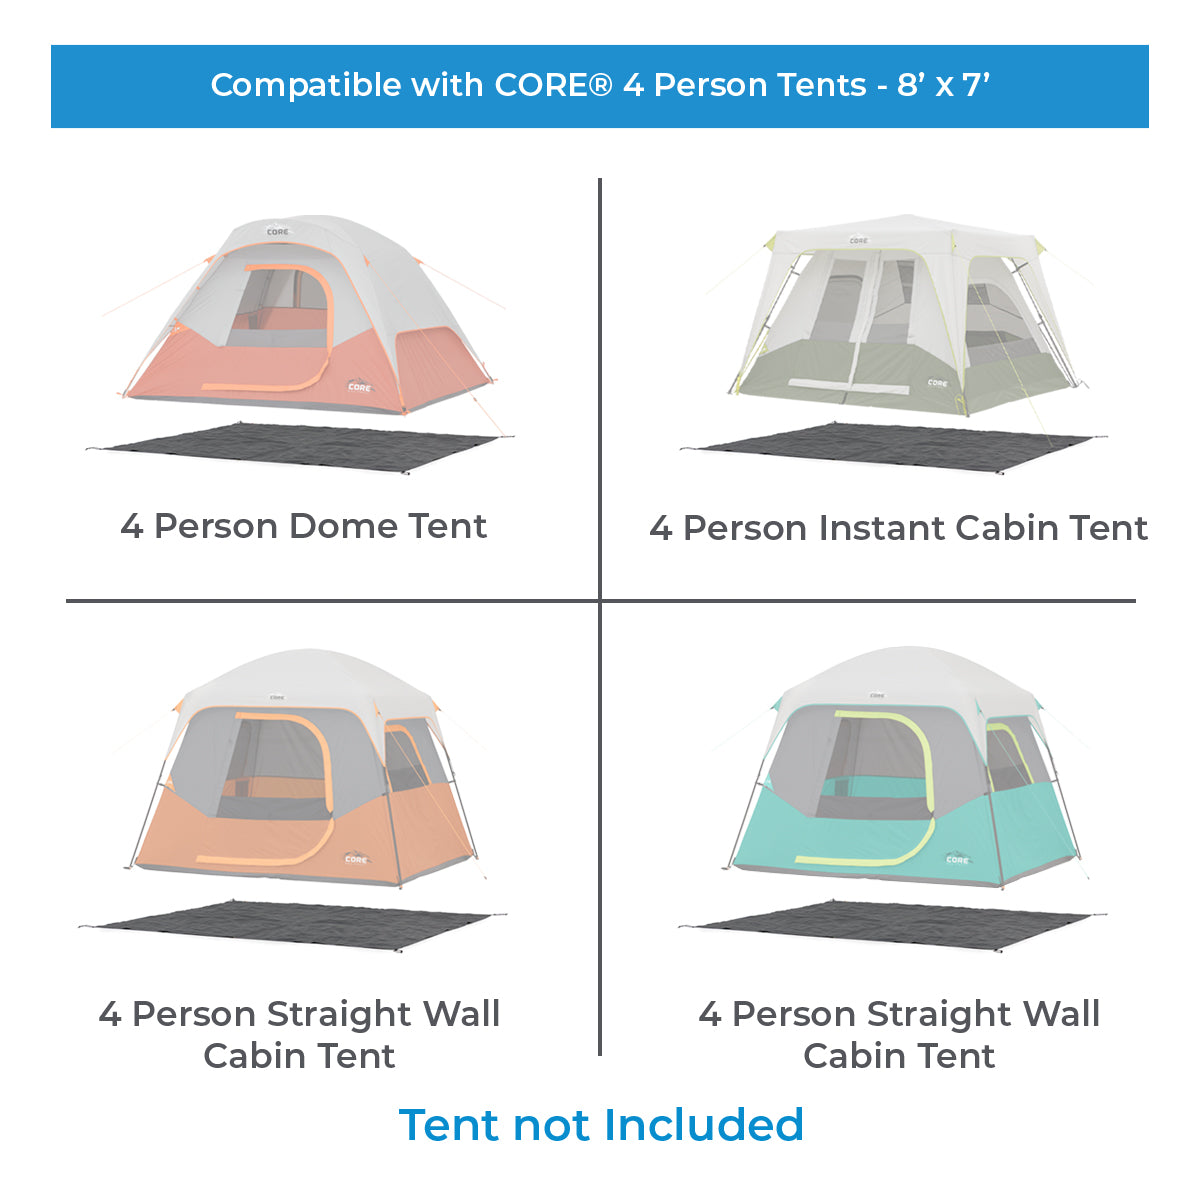 Footprint for 4 Person Tents - 8' x 7'